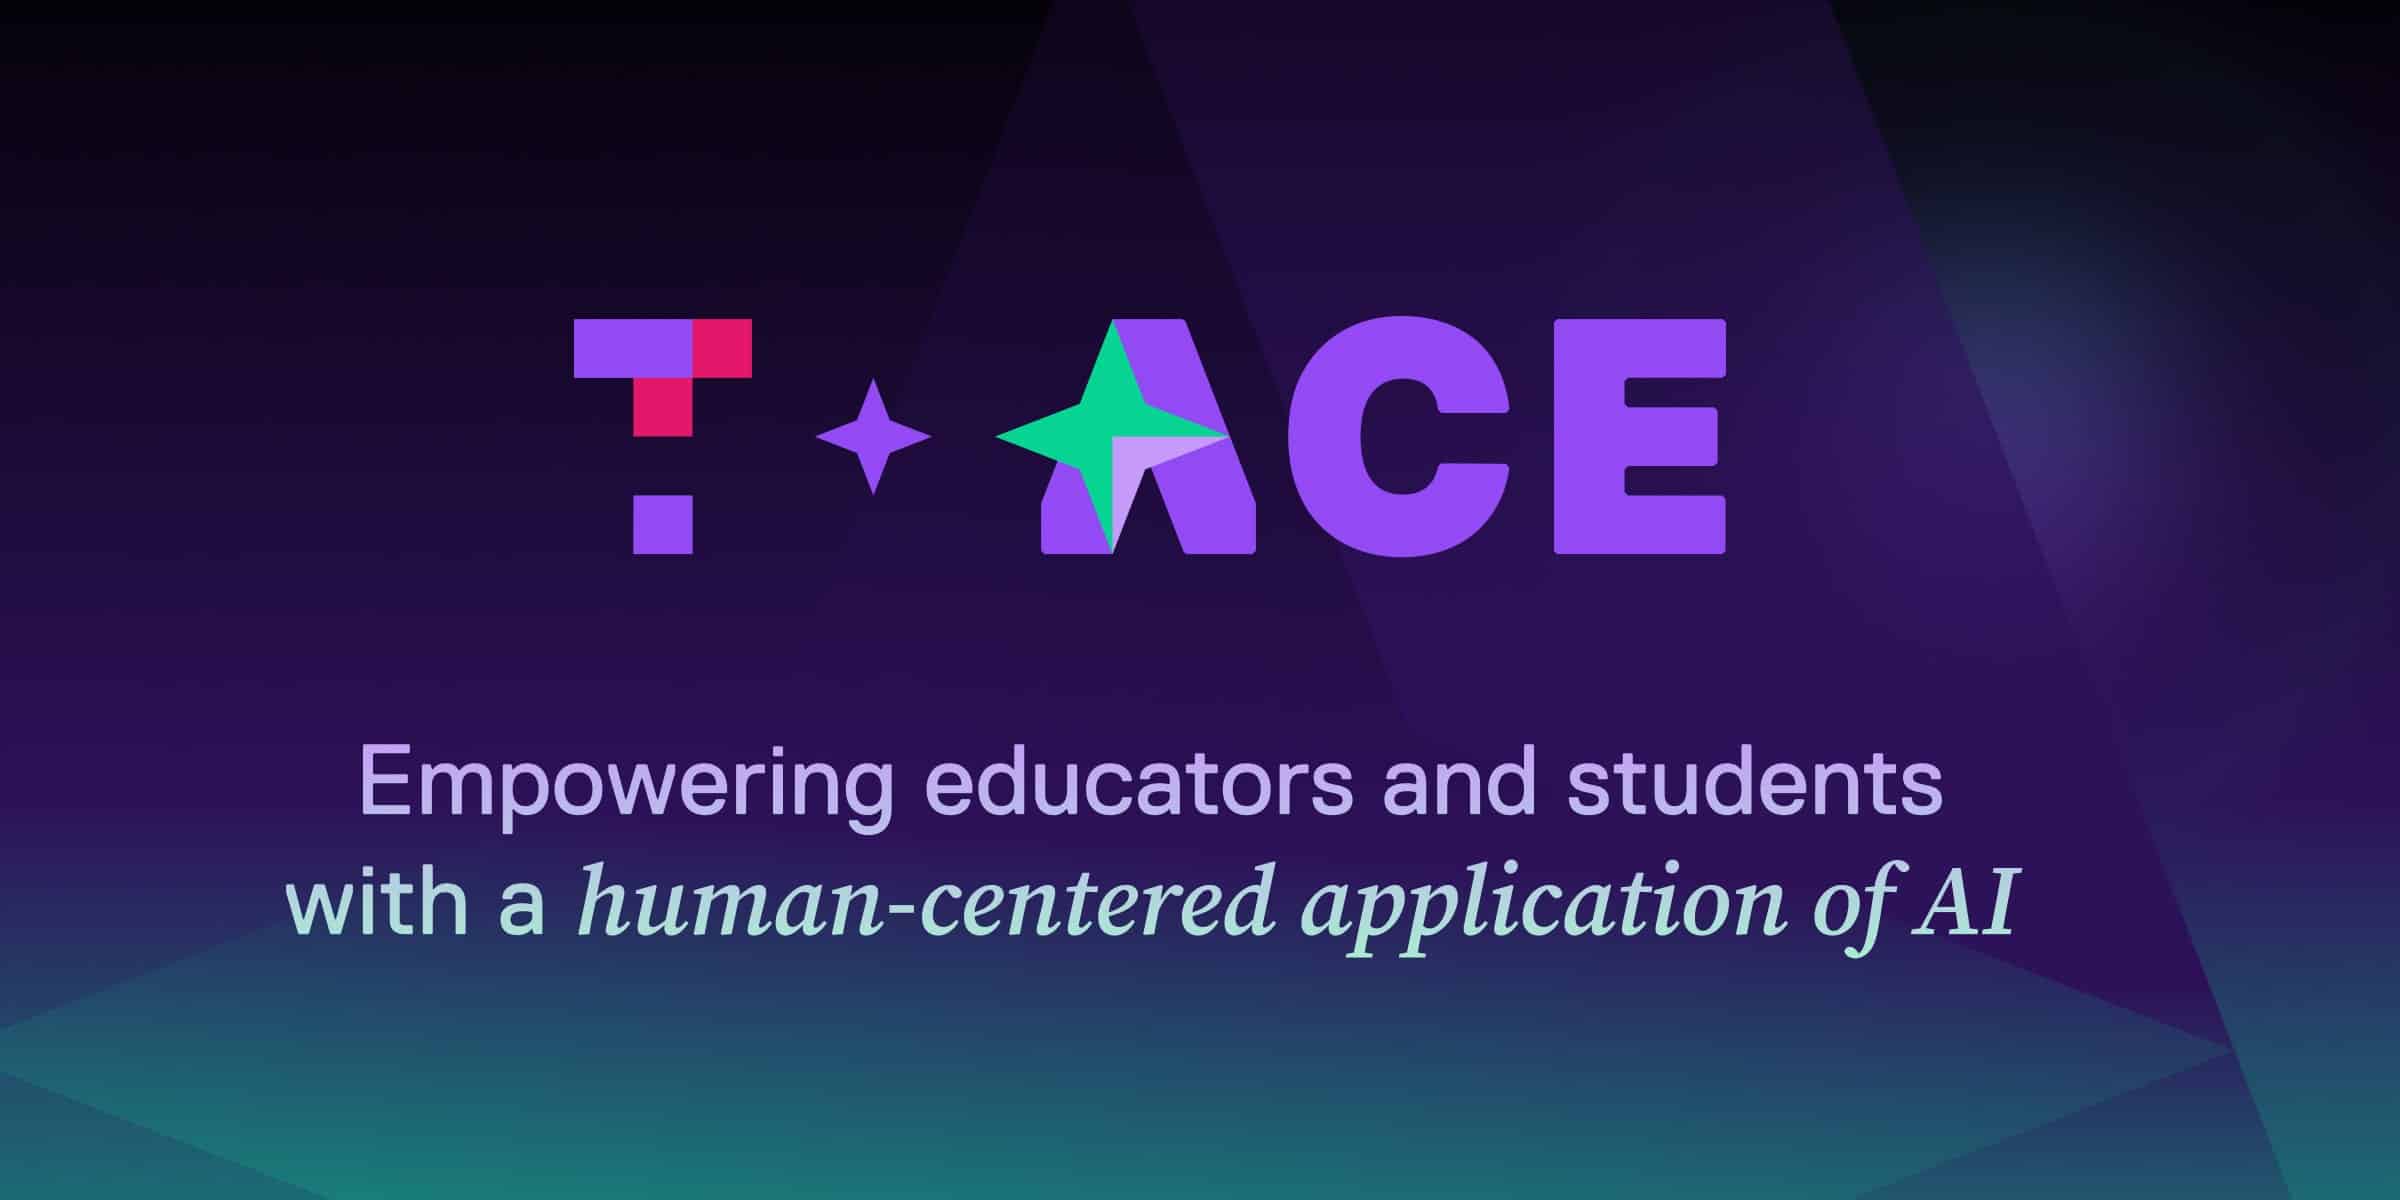 Top Hat Ace Empowers Educators and Students Through AI To Focus on What Matters Most